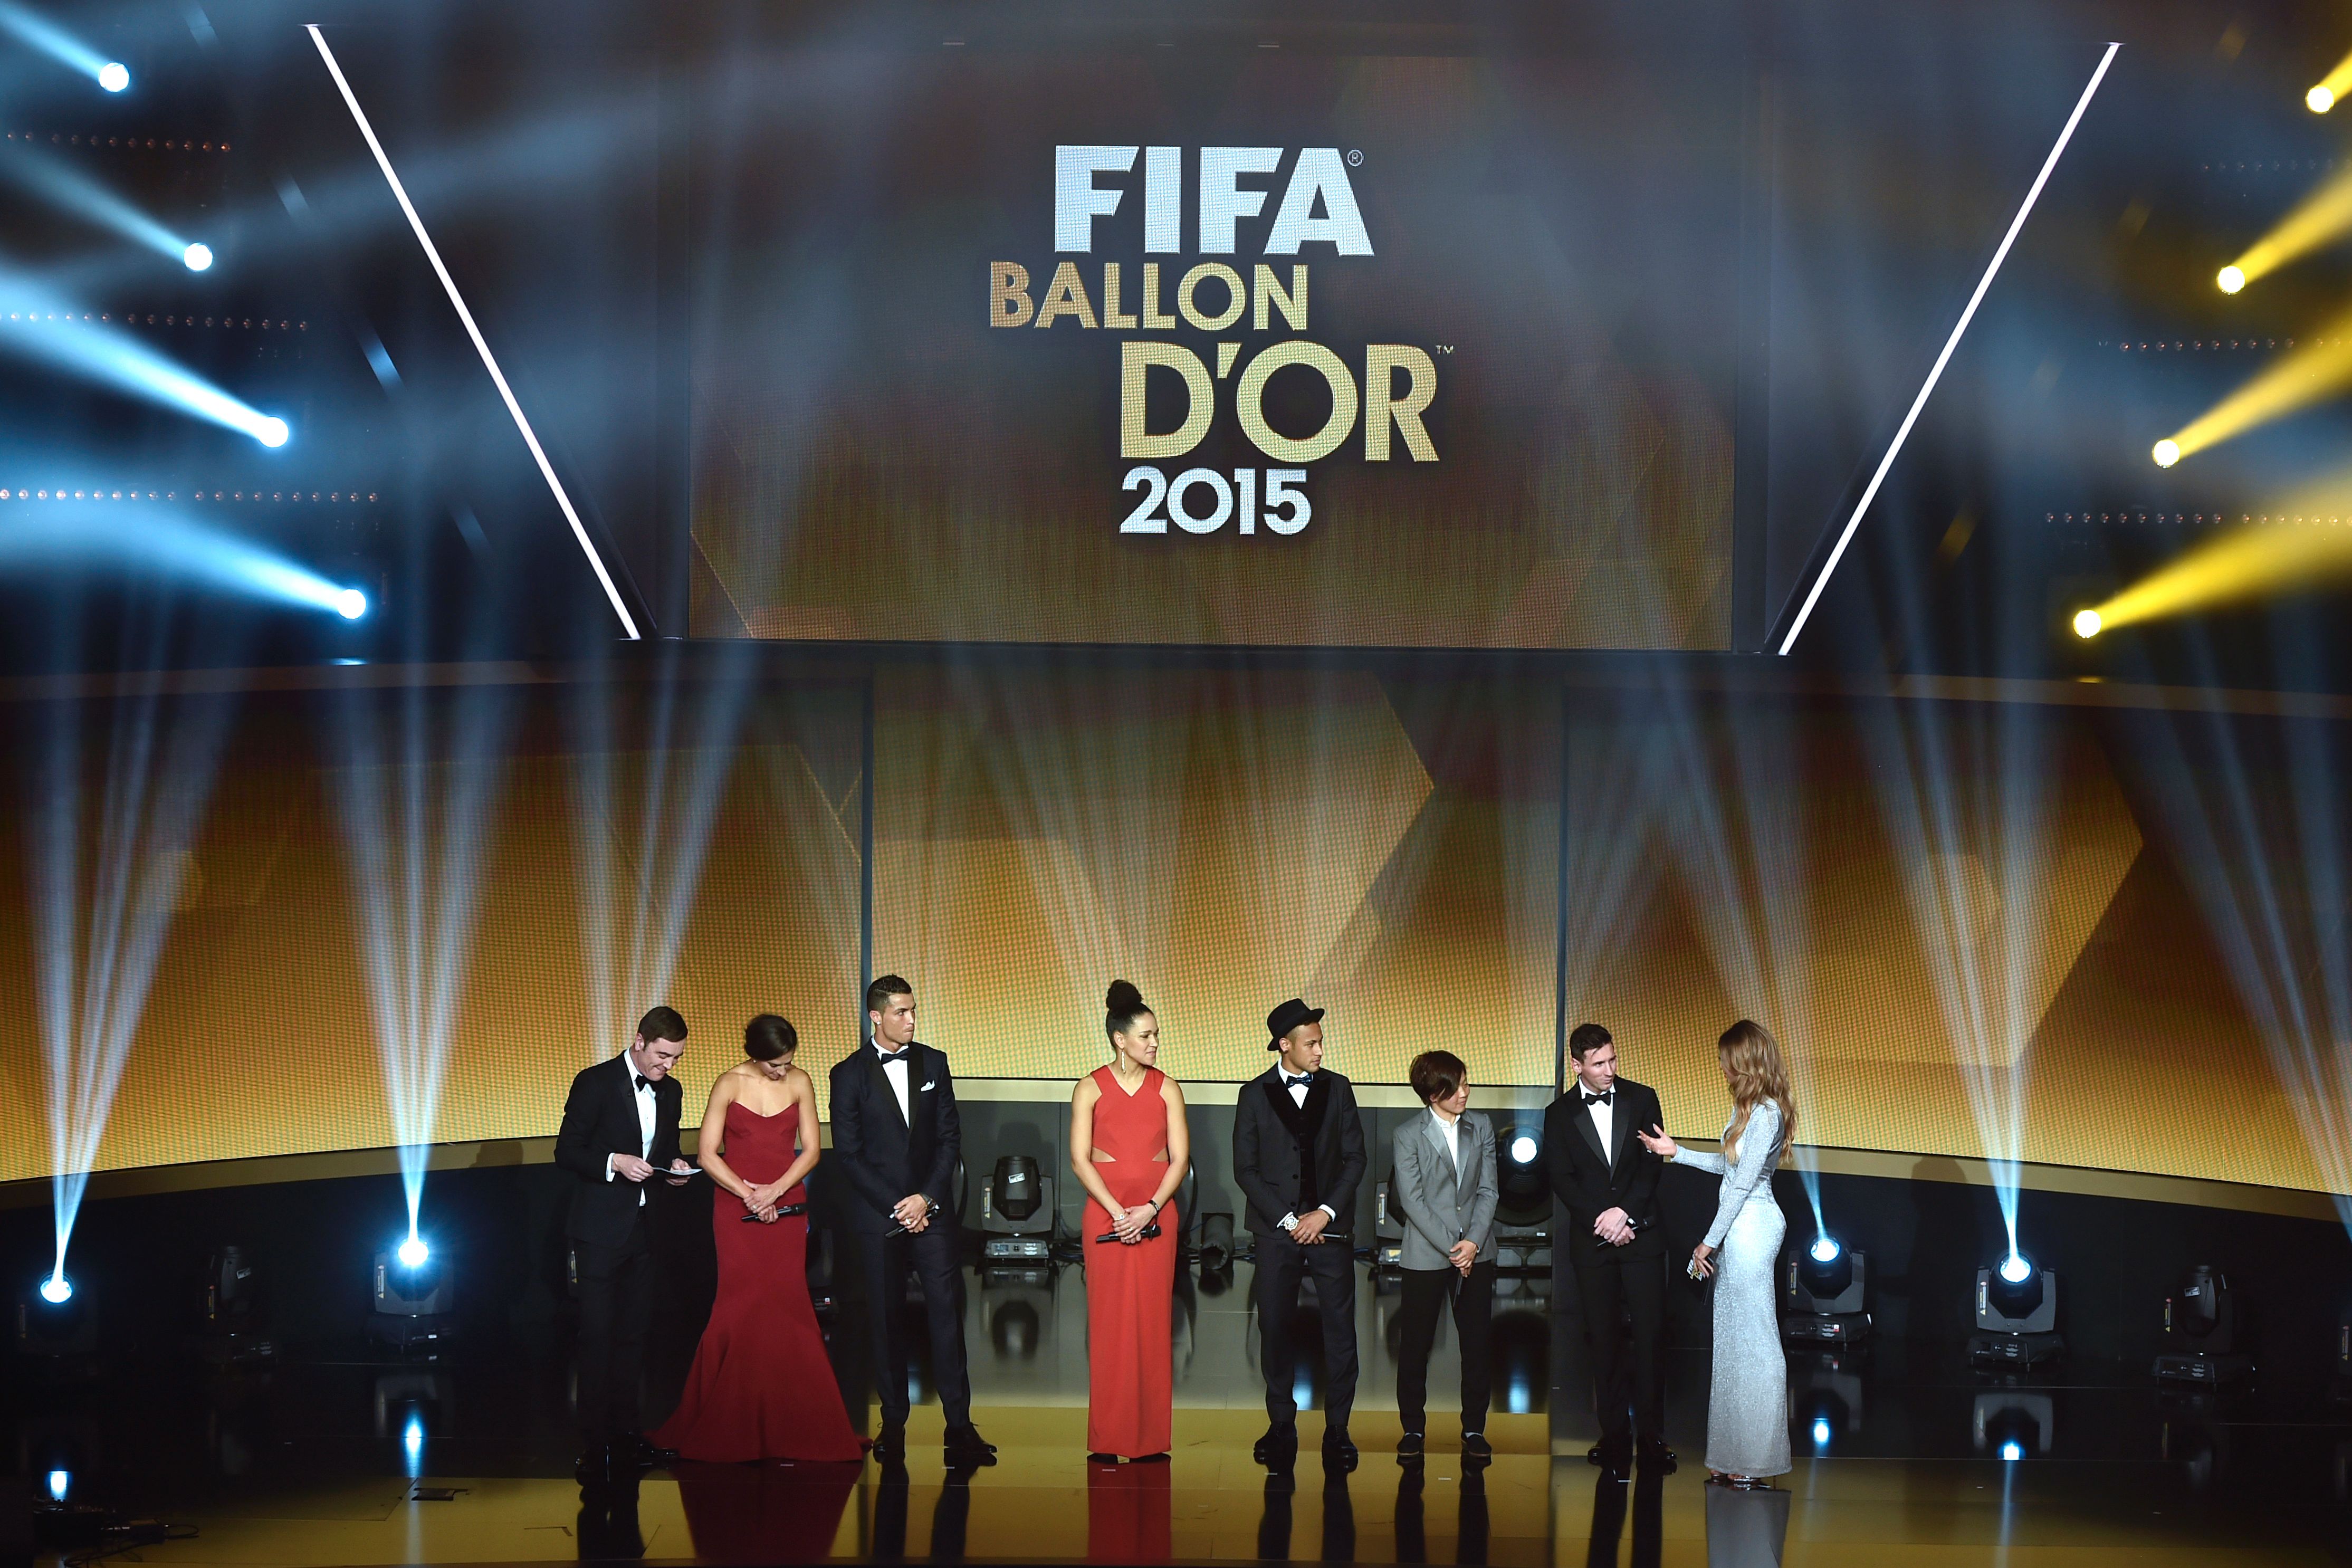 (From L) Northern Irish actor and host James Nesbitt, USA and Houston Dashs midfielder Carli Lloyd, Real Madrid and Portugal's forward Cristiano Ronaldo, Germany and 1 FFC Frankfurt's forward Celia Sasic, FC Barcelona and Brazils forward Neymar, Japan and Okayama Yunogo's Belle midfielder Aya Miyama, FC Barcelona and Argentina's forward Lionel Messi and British presenter and host Kate Abdo pose during the 2015 FIFA Ballon d'Or award ceremony at the Kongresshaus in Zurich on January 11, 2016.  AFP PHOTO / FABRICE COFFRINI / AFP / FABRICE COFFRINI        (Photo credit should read FABRICE COFFRINI/AFP/Getty Images)